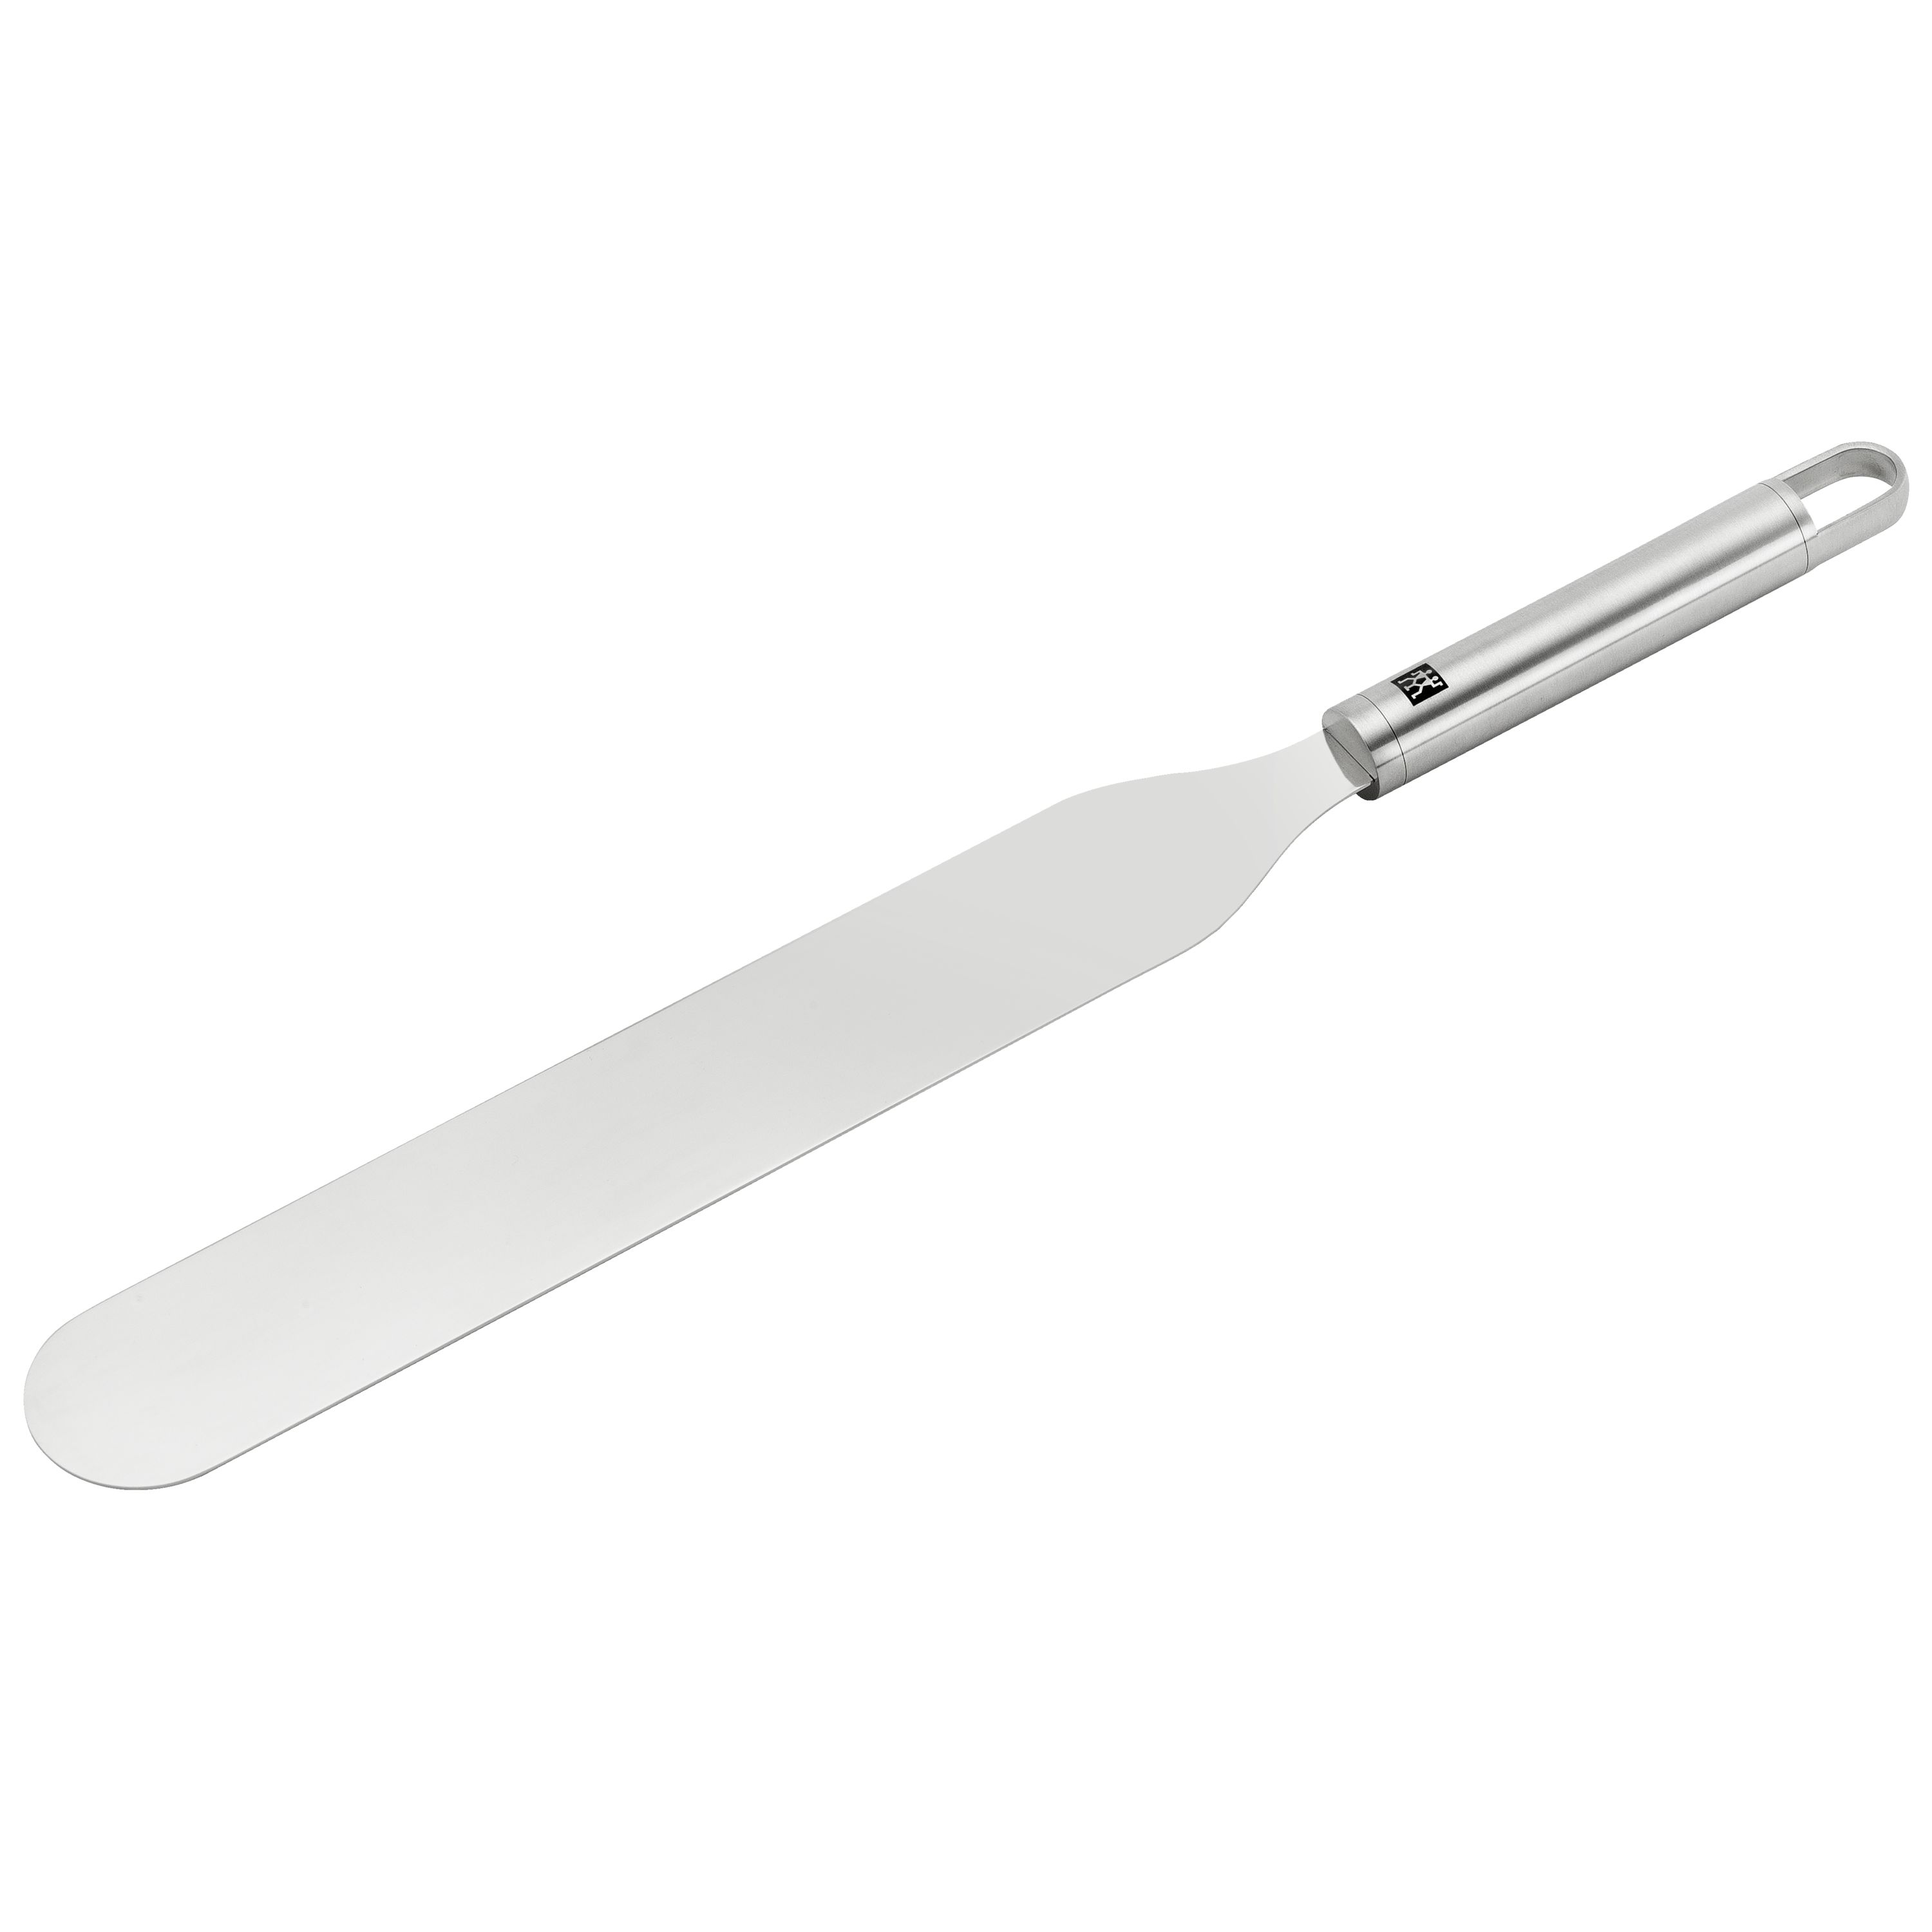 https://www.zwilling.com/on/demandware.static/-/Sites-zwilling-master-catalog/default/dw359faa27/images/large/37160-027-0_1.jpg